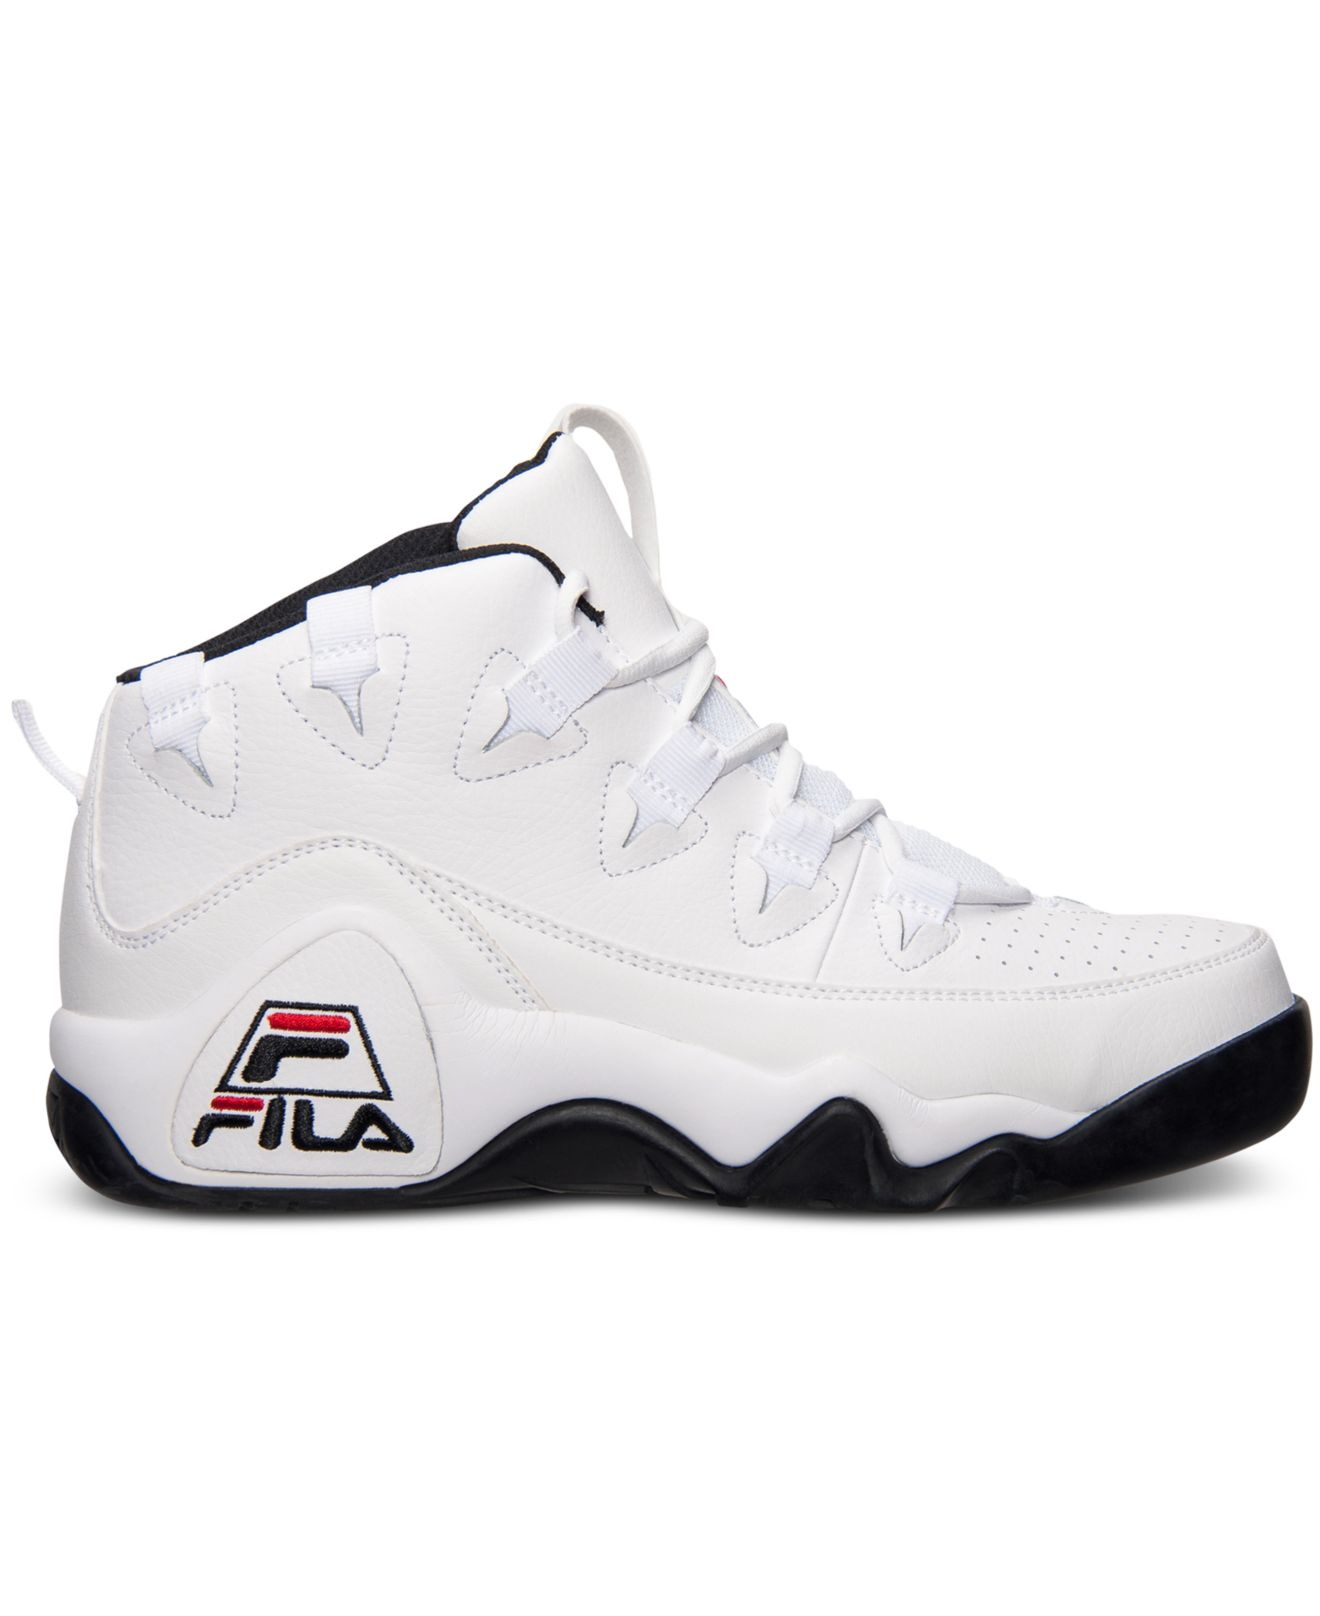 Fila Leather Men's The 95 Basketball Sneakers From Finish Line in Black ...